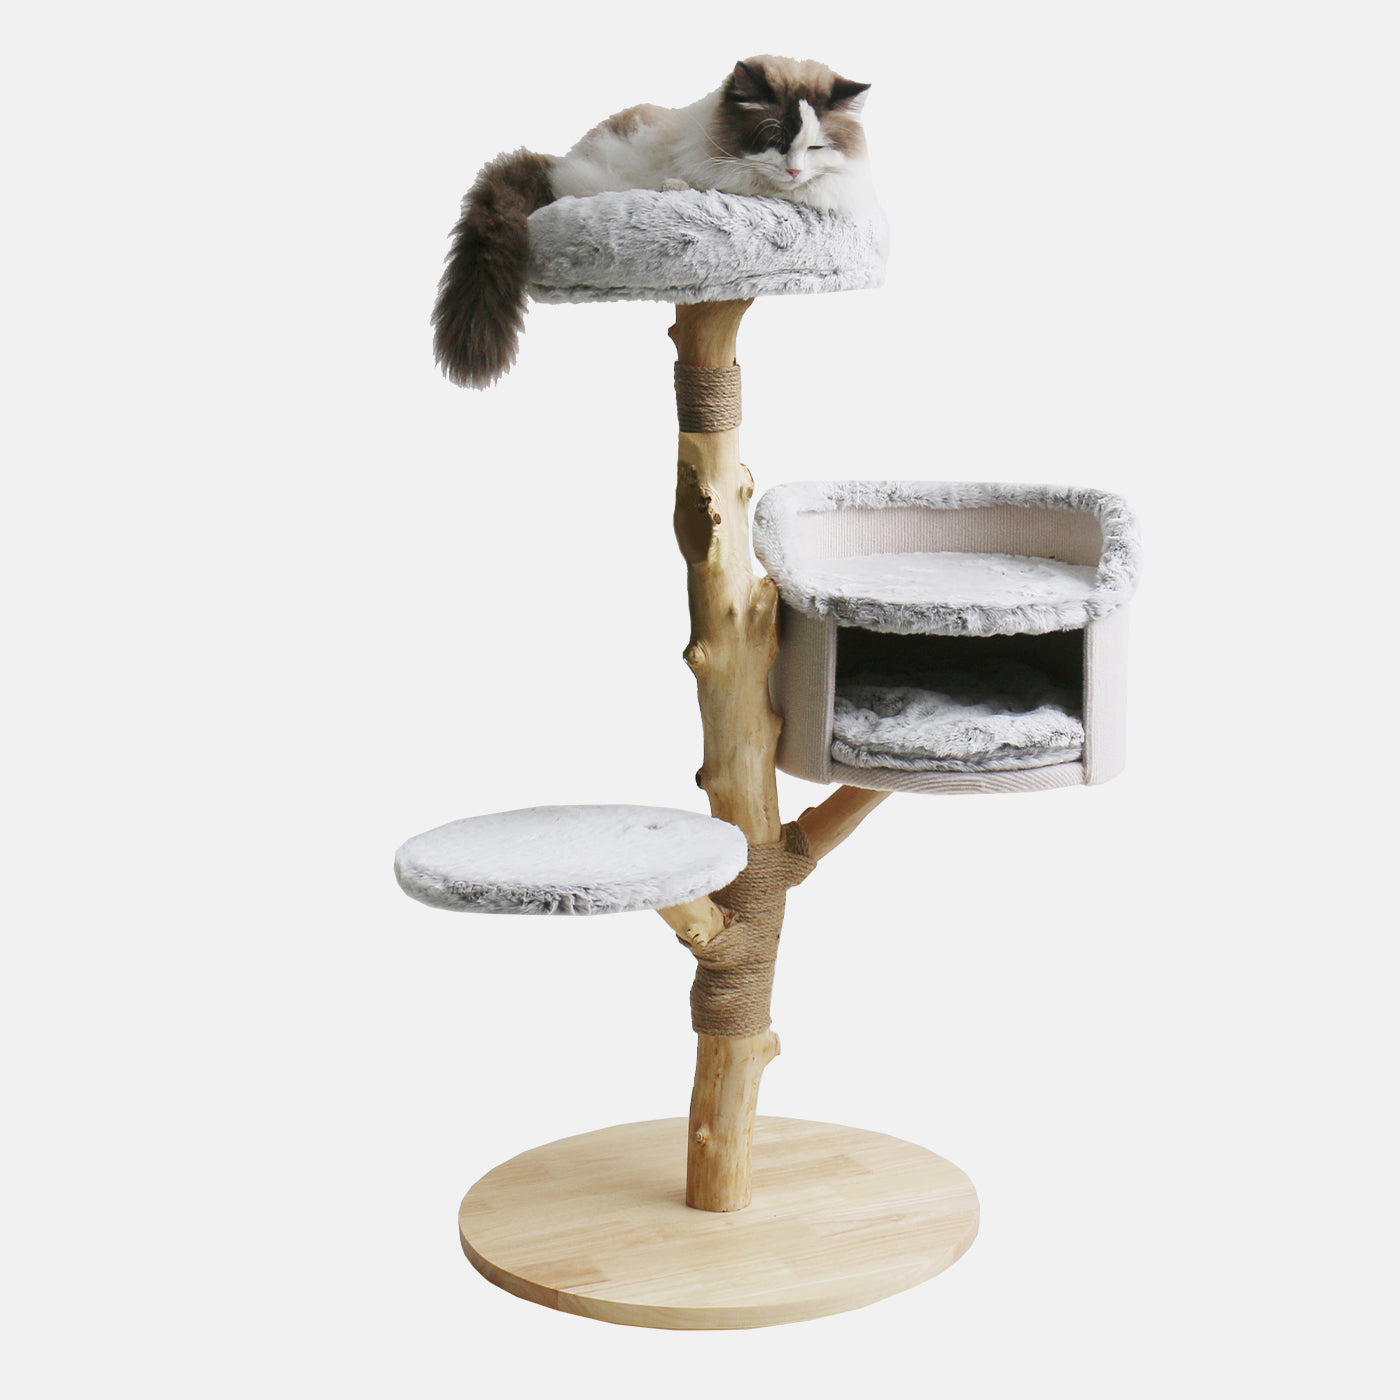  Luxury Cat Scratch Post With Three Open Perches For Kittens To Rest on, Made With Super Soft Plush Fabric! Available Now at Lords & Labradors 